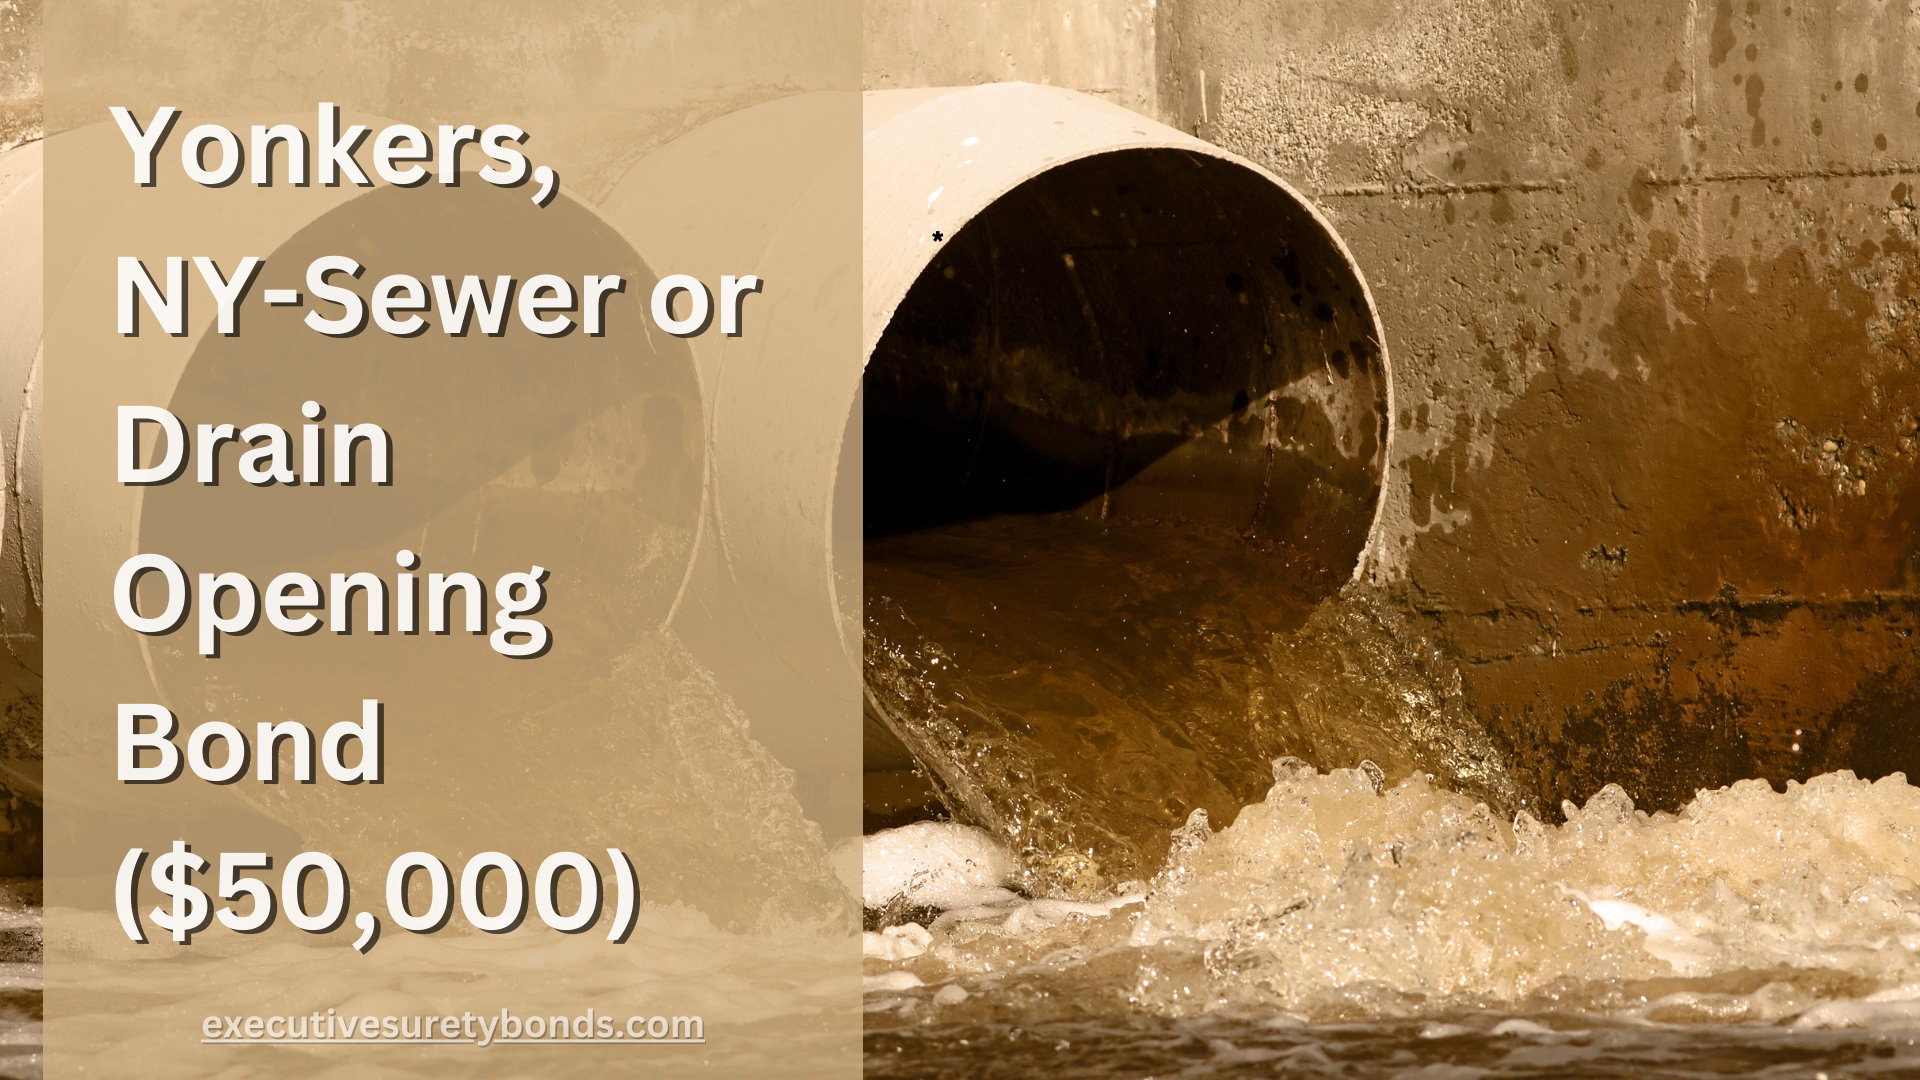 Yonkers, NY-Sewer or Drain Opening Bond ($50,000)